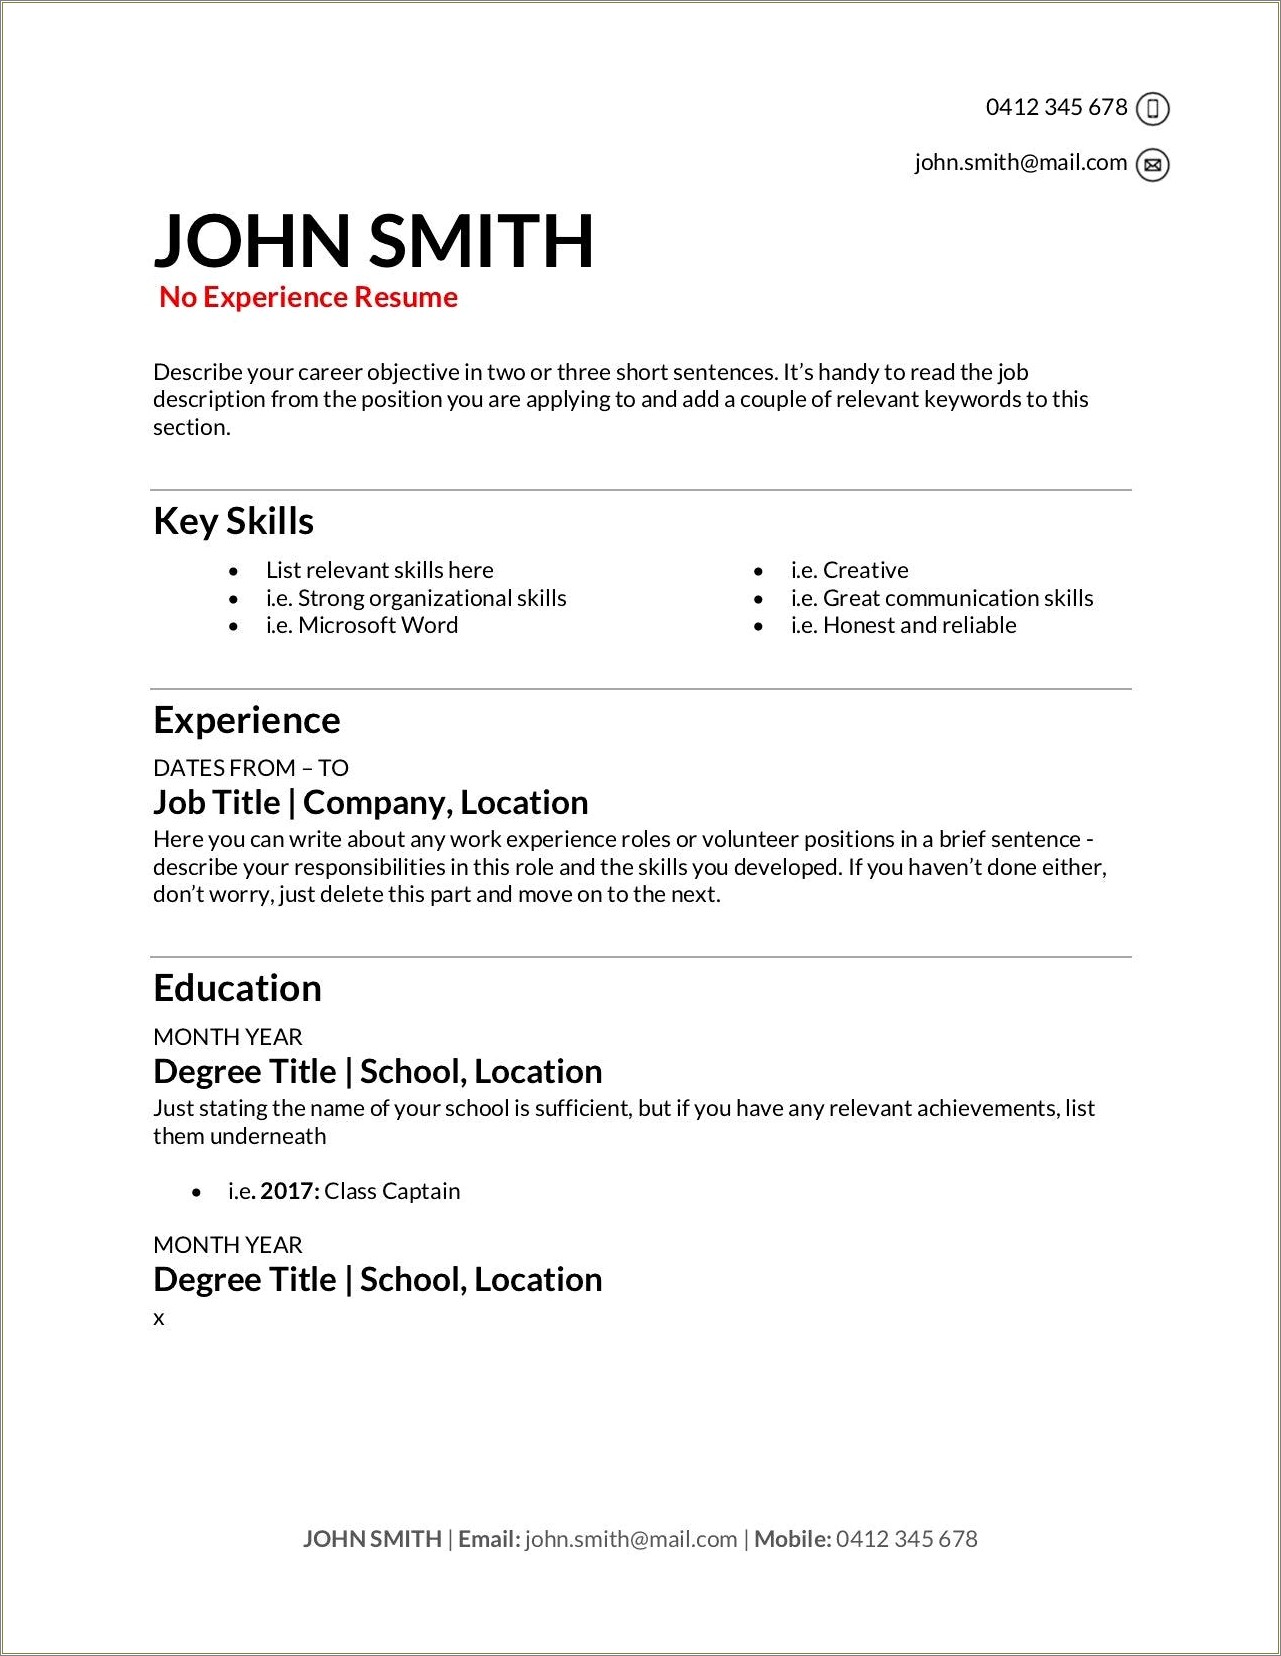 Resume List Professional Experience Before Education